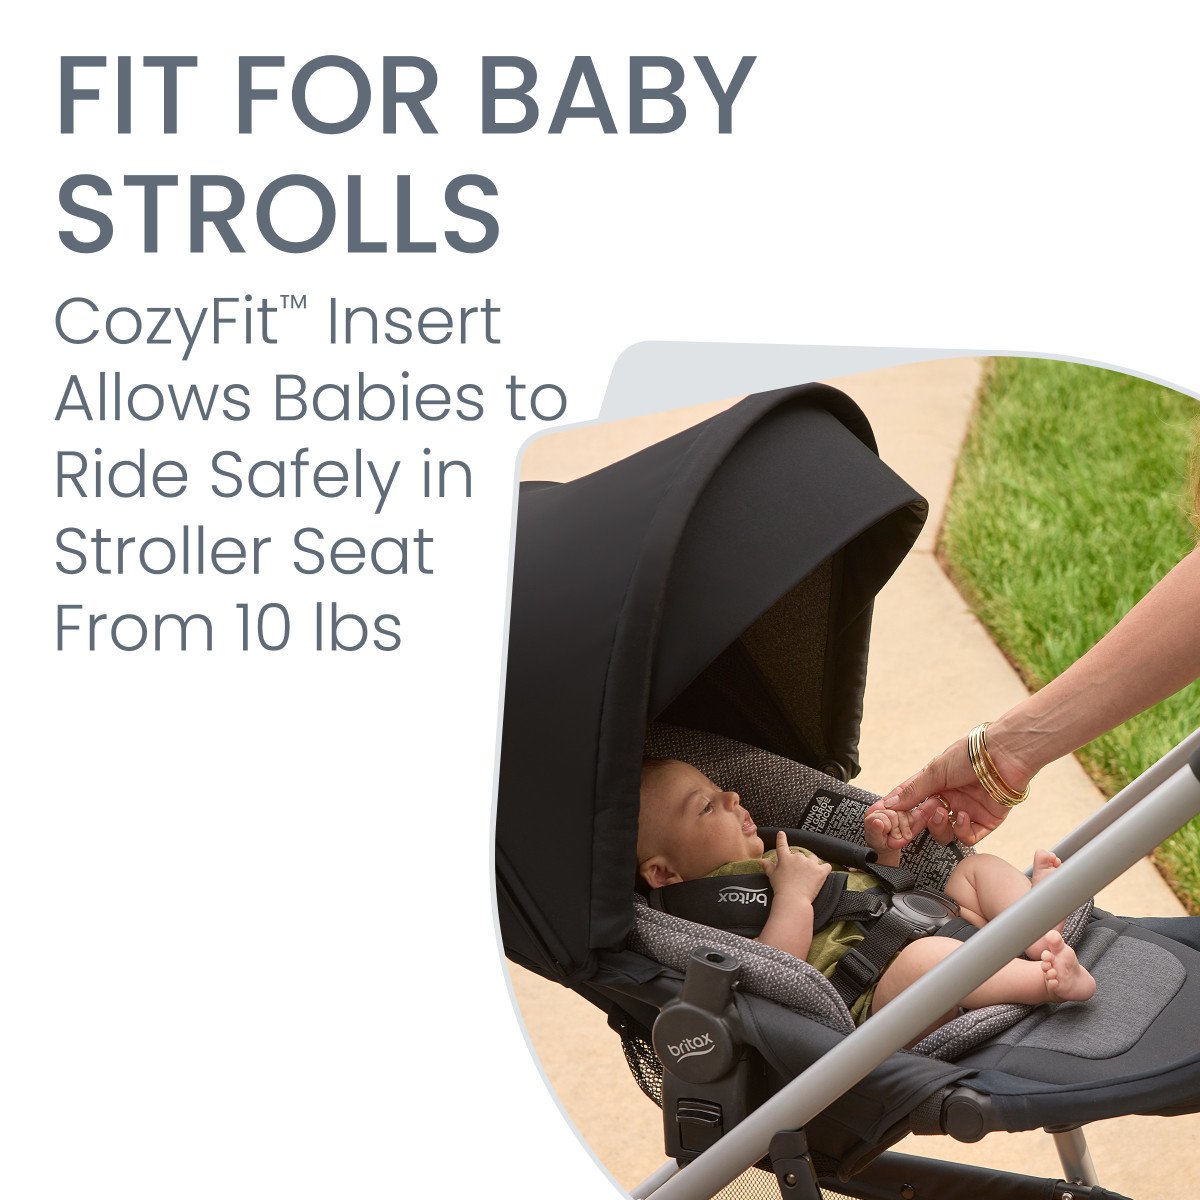 Fit for baby strolls